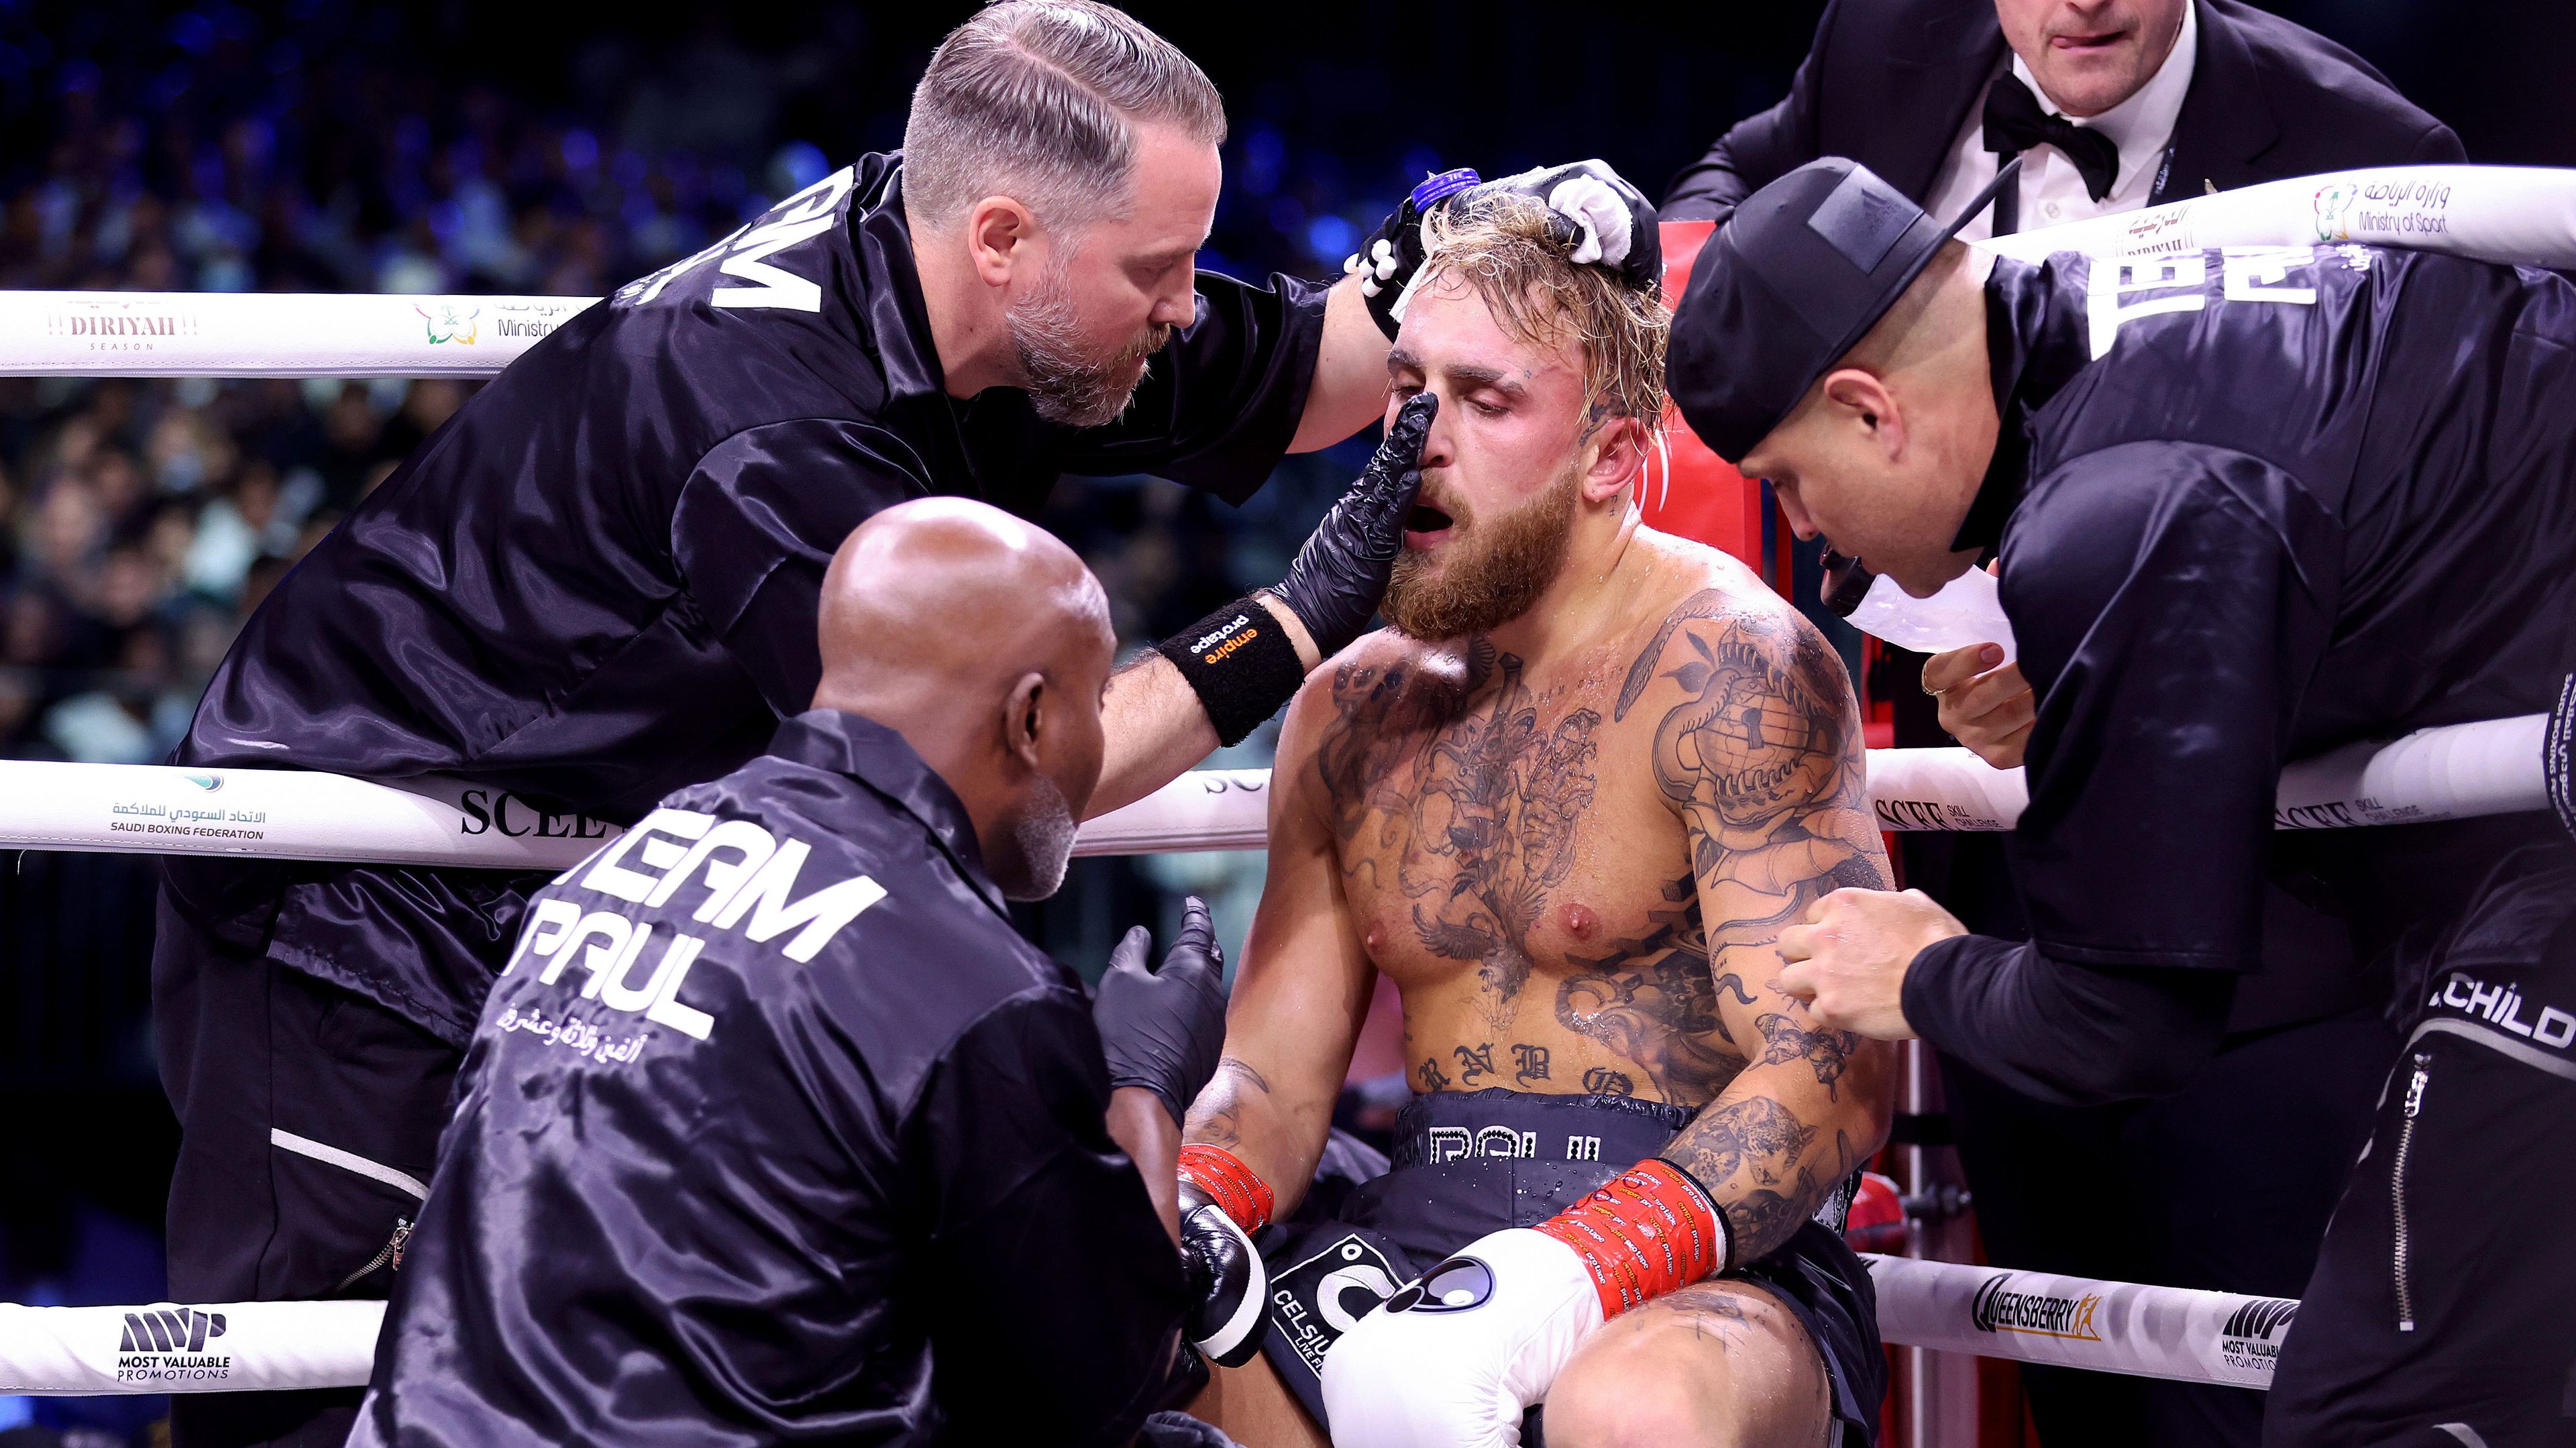 Jake Paul receives medical treatment during his cruiserweight title fight against Tommy Fury.